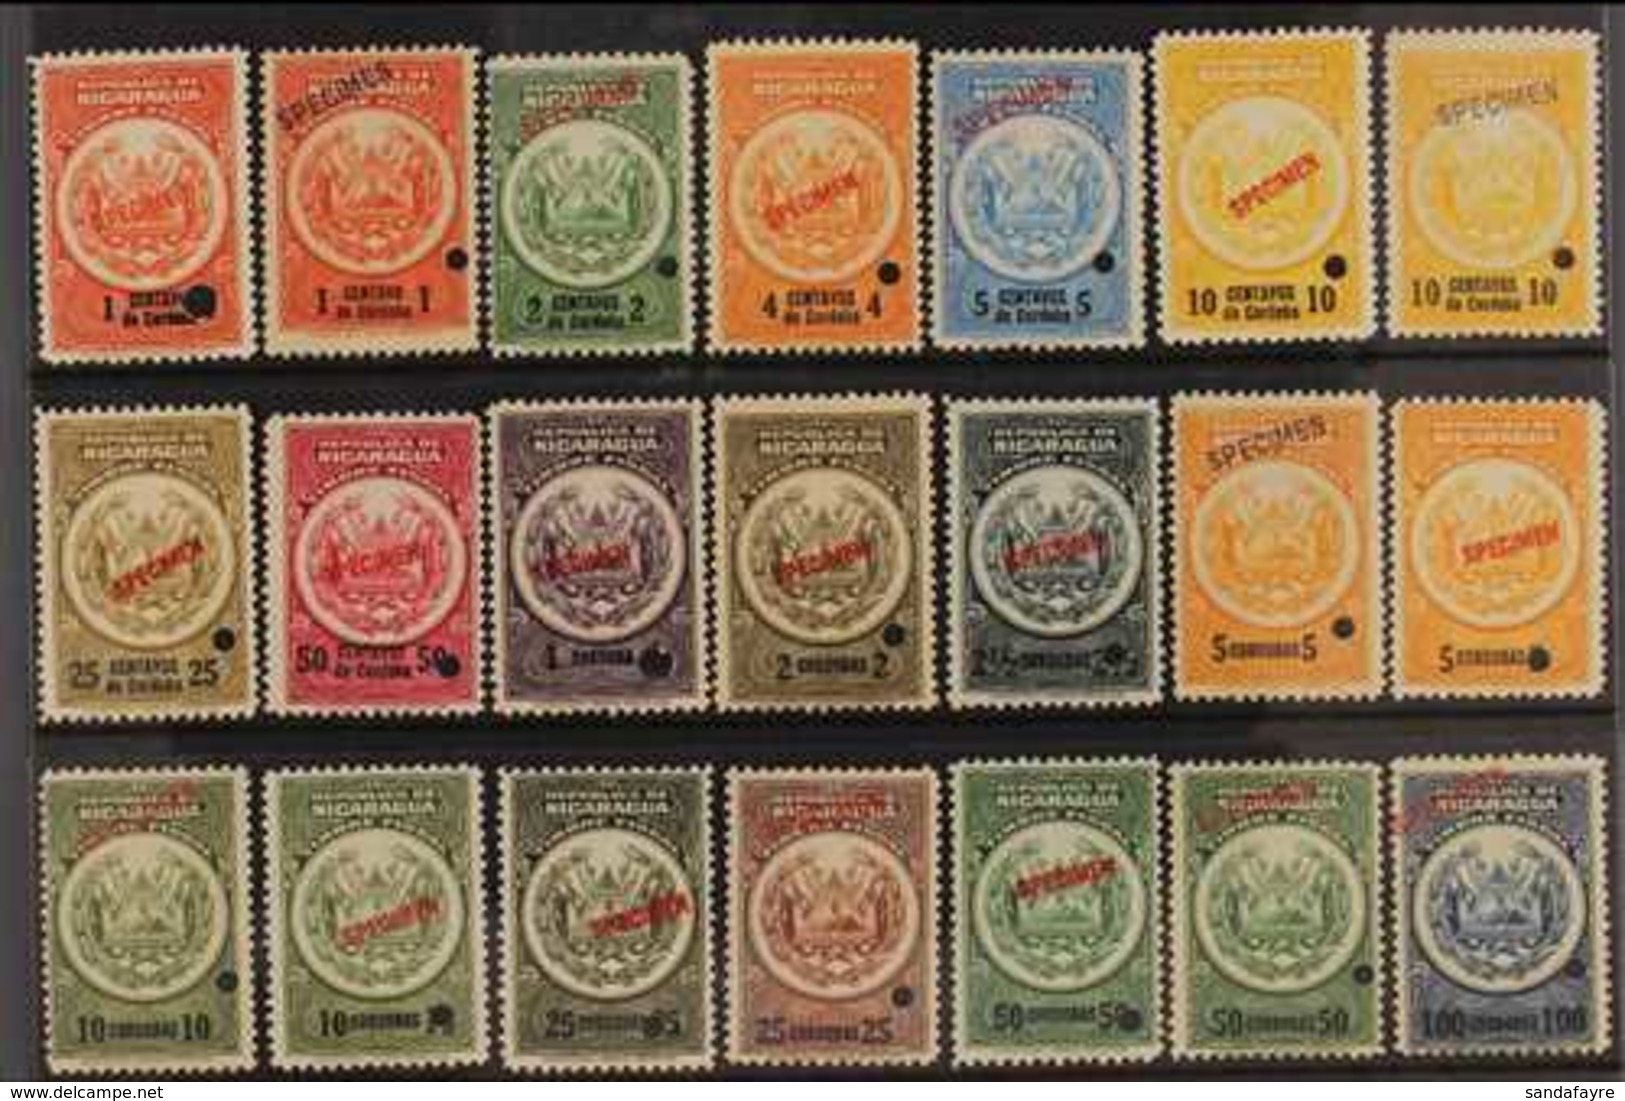 REVENUES  TIMBRE FISCAL 1920 All Different Group With Values To 100cor, All With "SPECIMEN" Overprints & Small Security  - Nicaragua